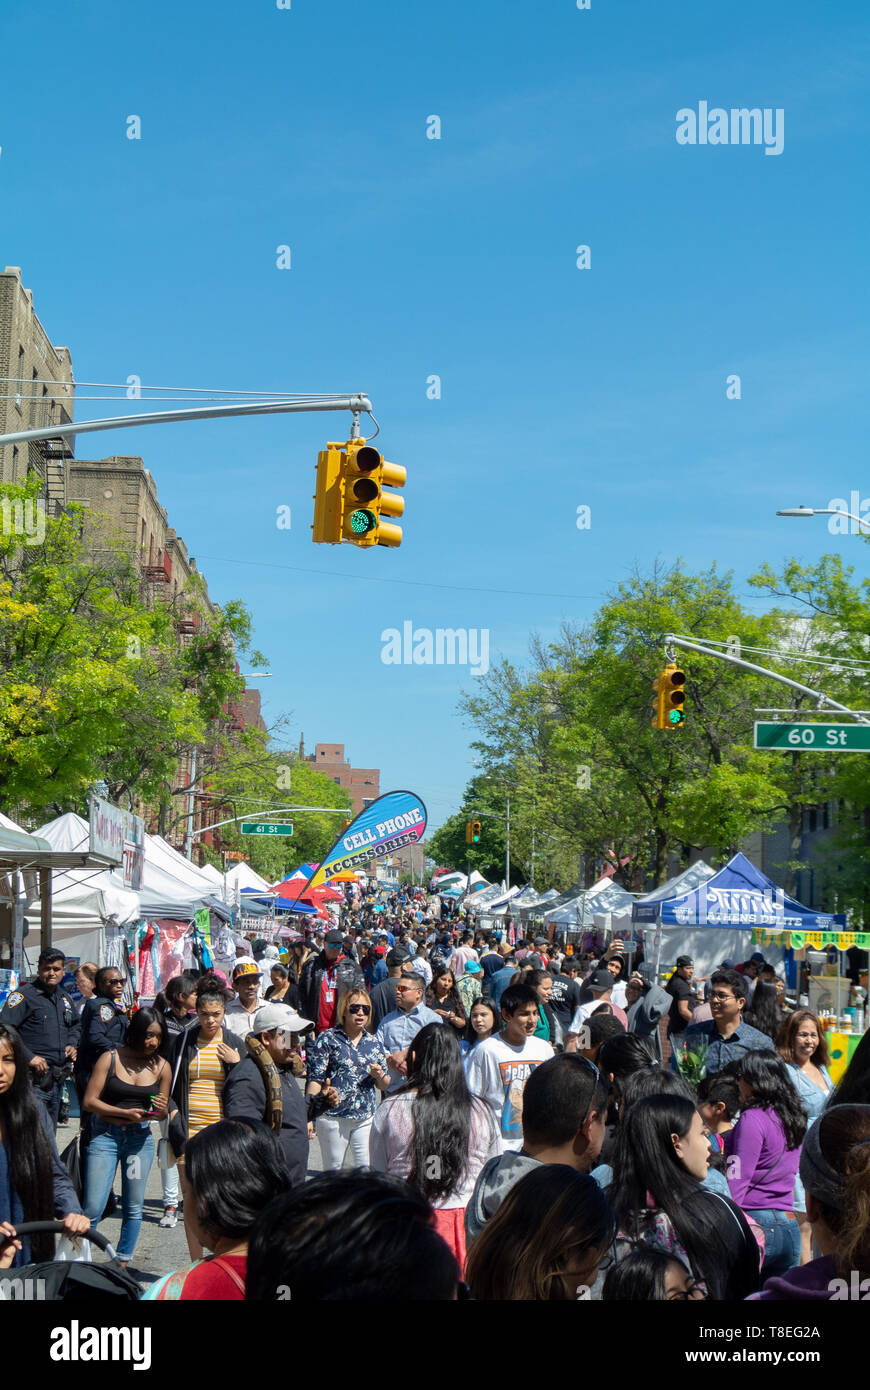 Weekend market, woodside, queens, Queens, New York, , ny, united states of america, usa Stock Photo